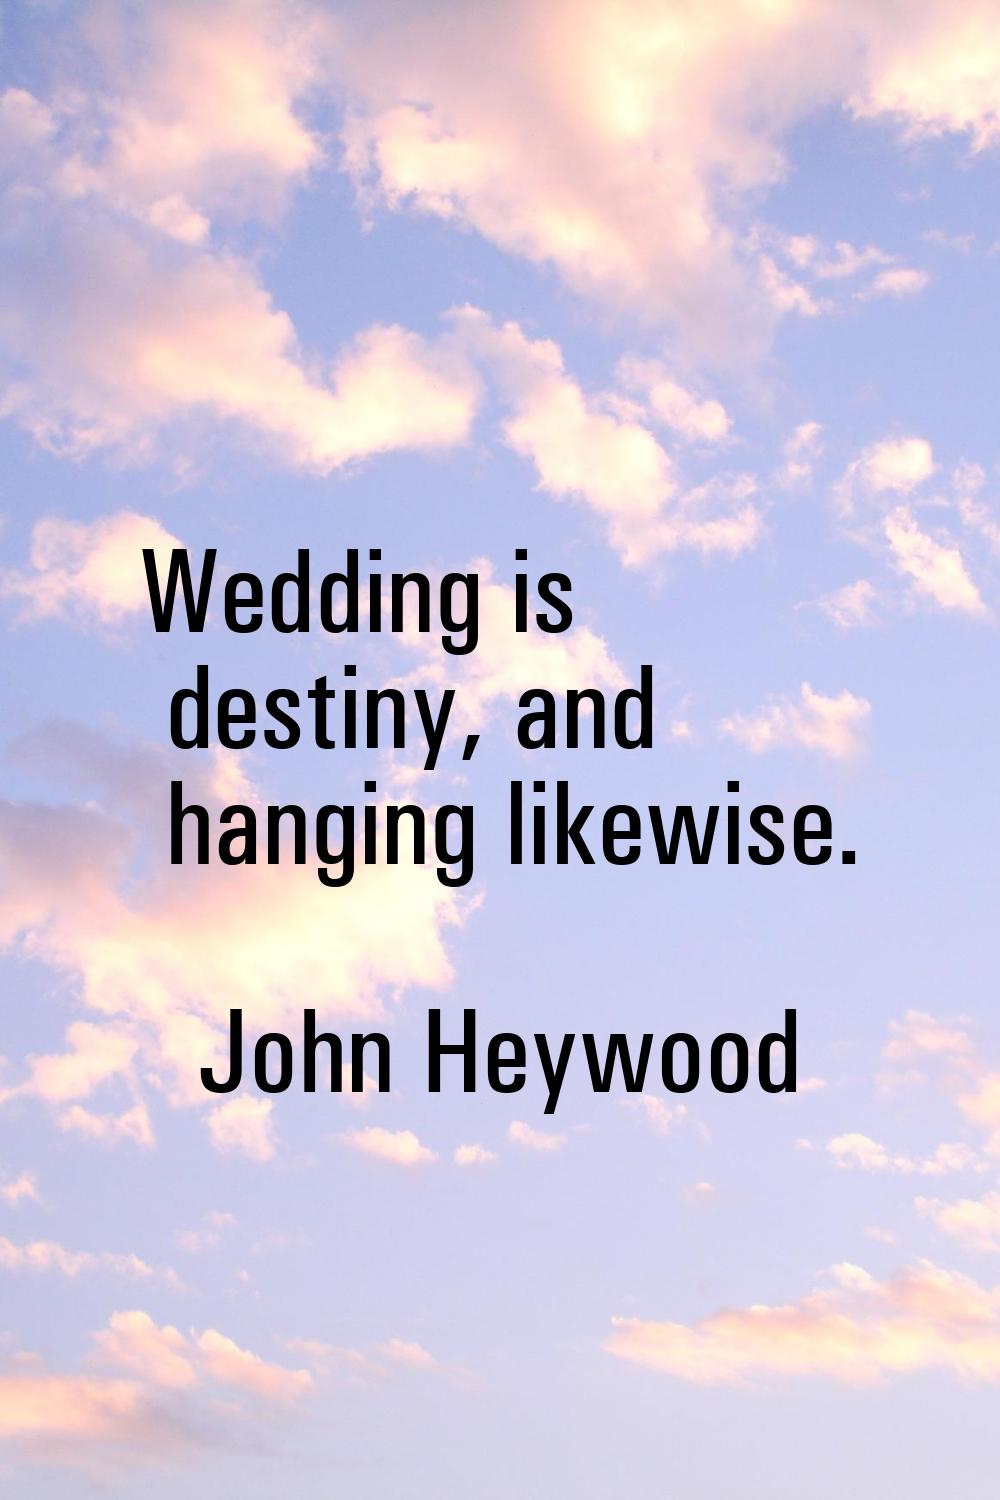 Wedding is destiny, and hanging likewise.